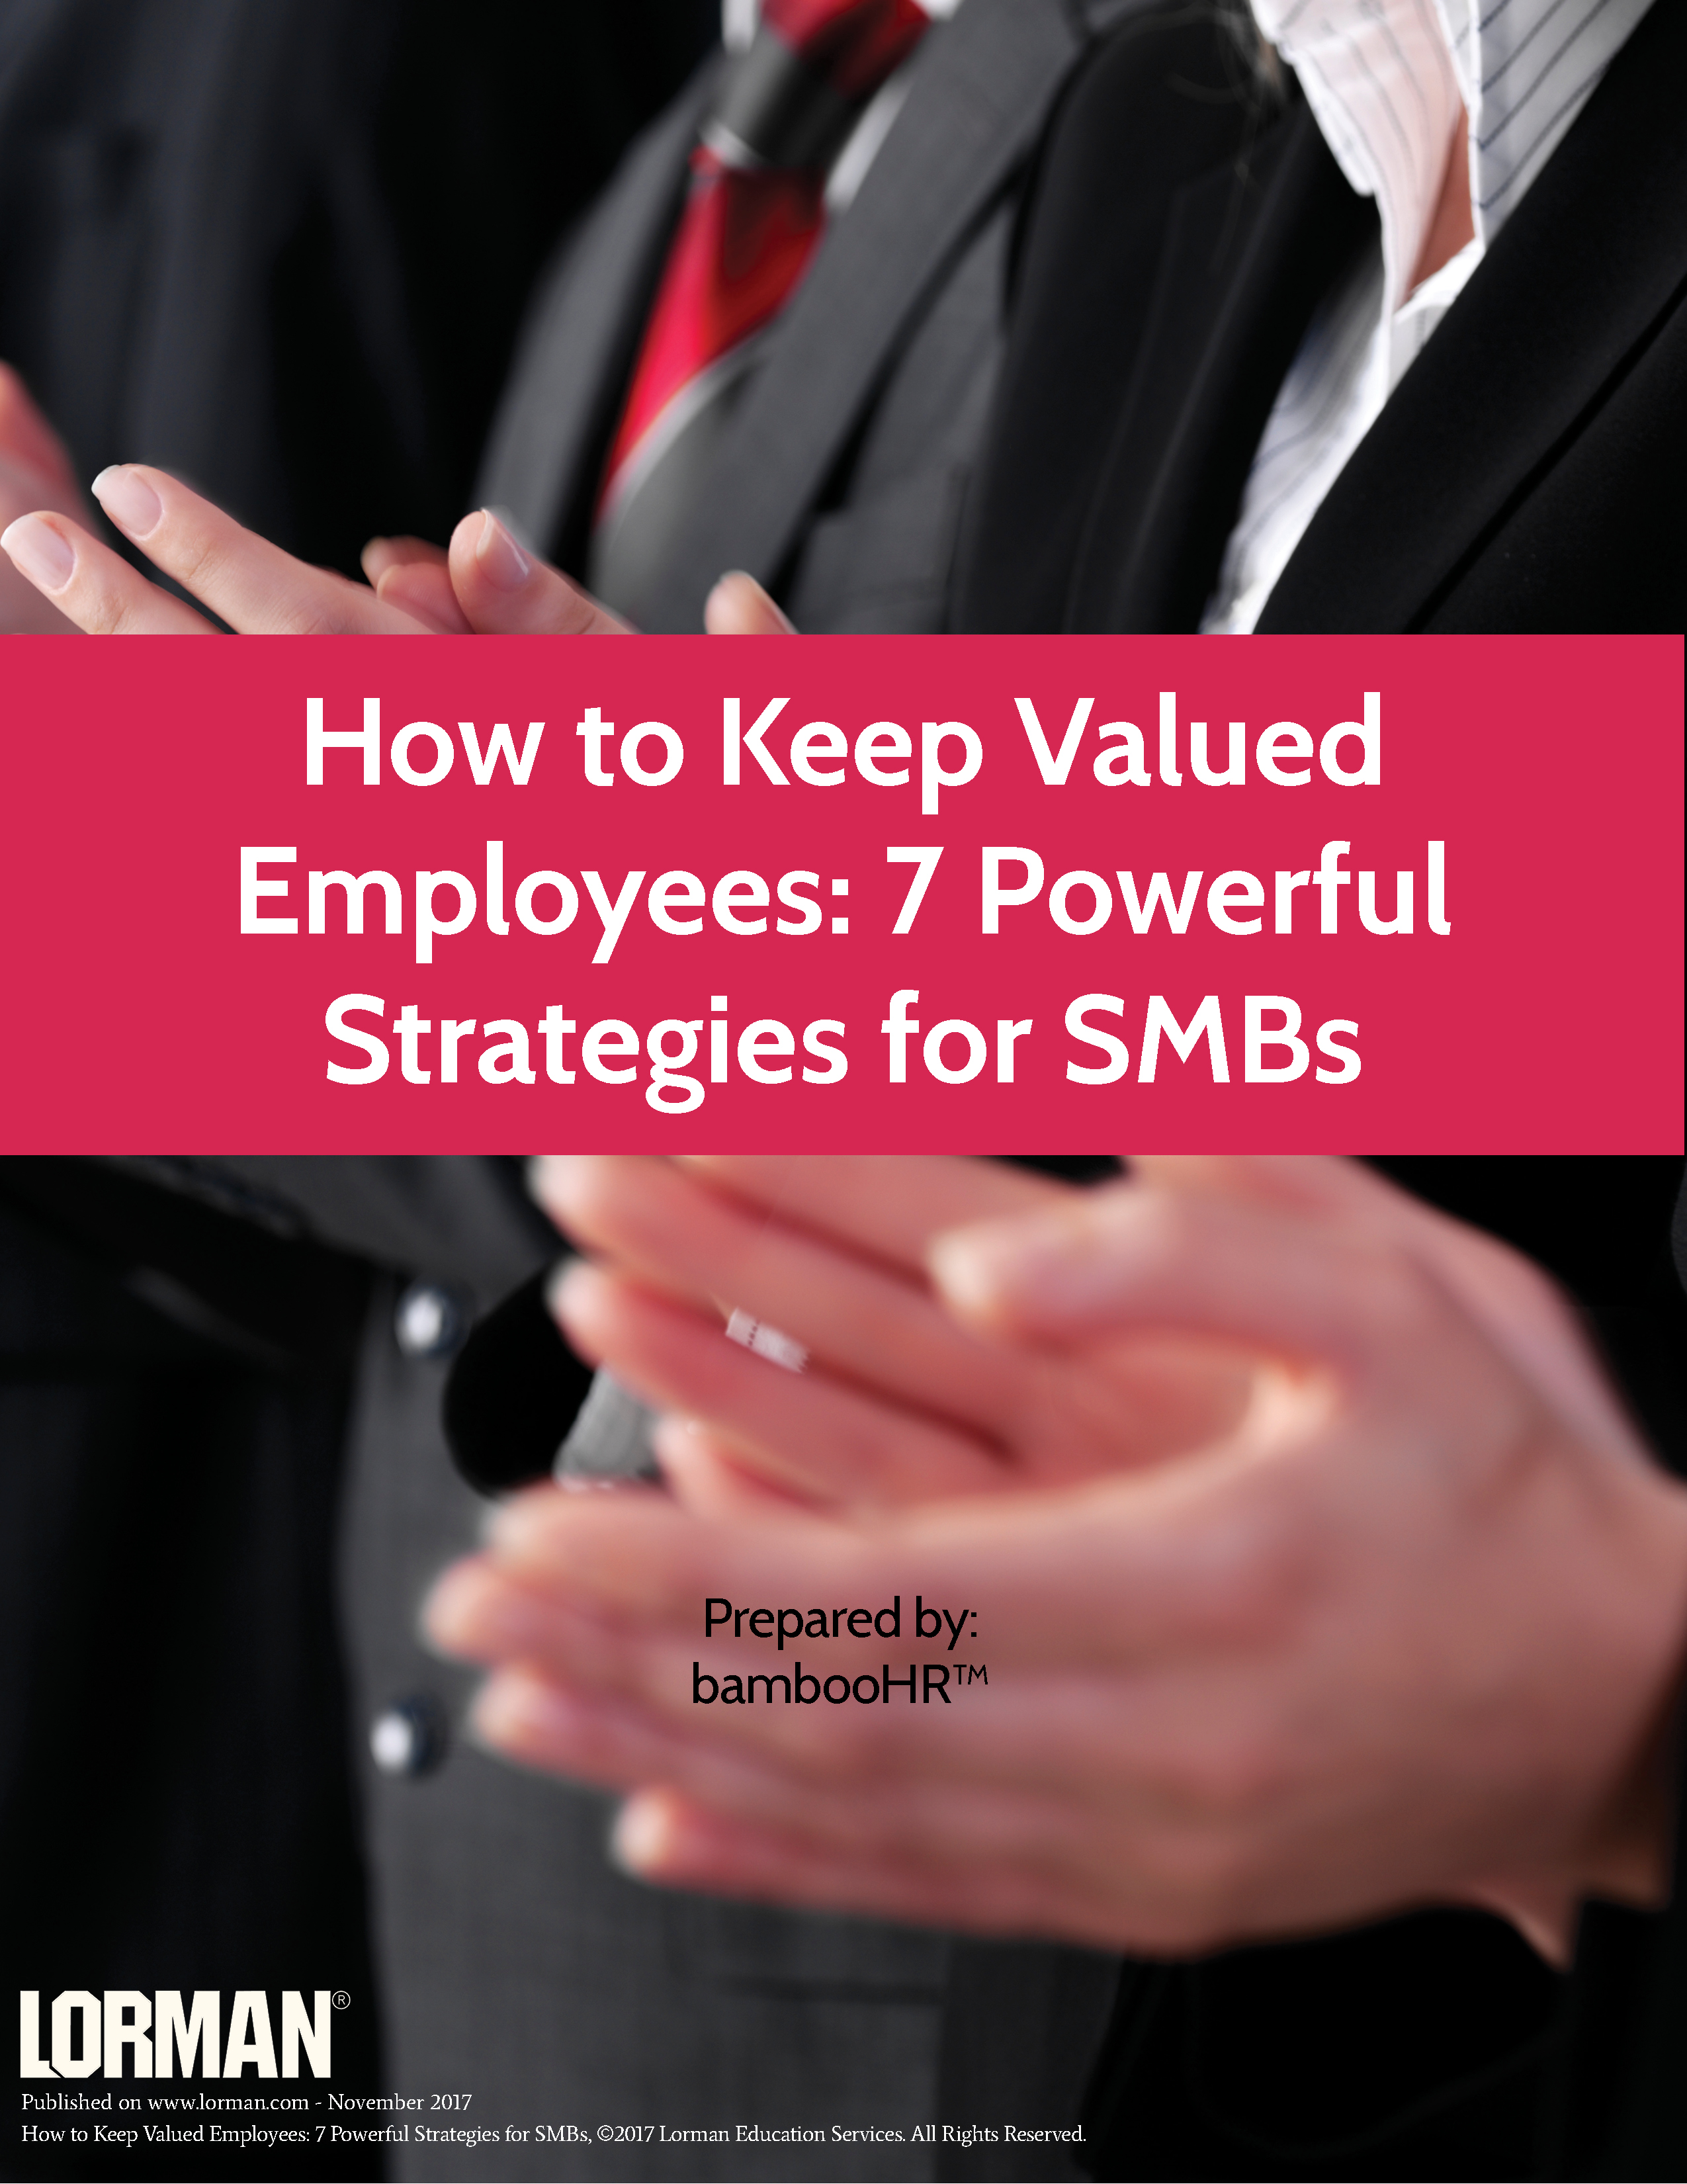 How to Keep Valued Employees: 7 Powerful Strategies for SMBs